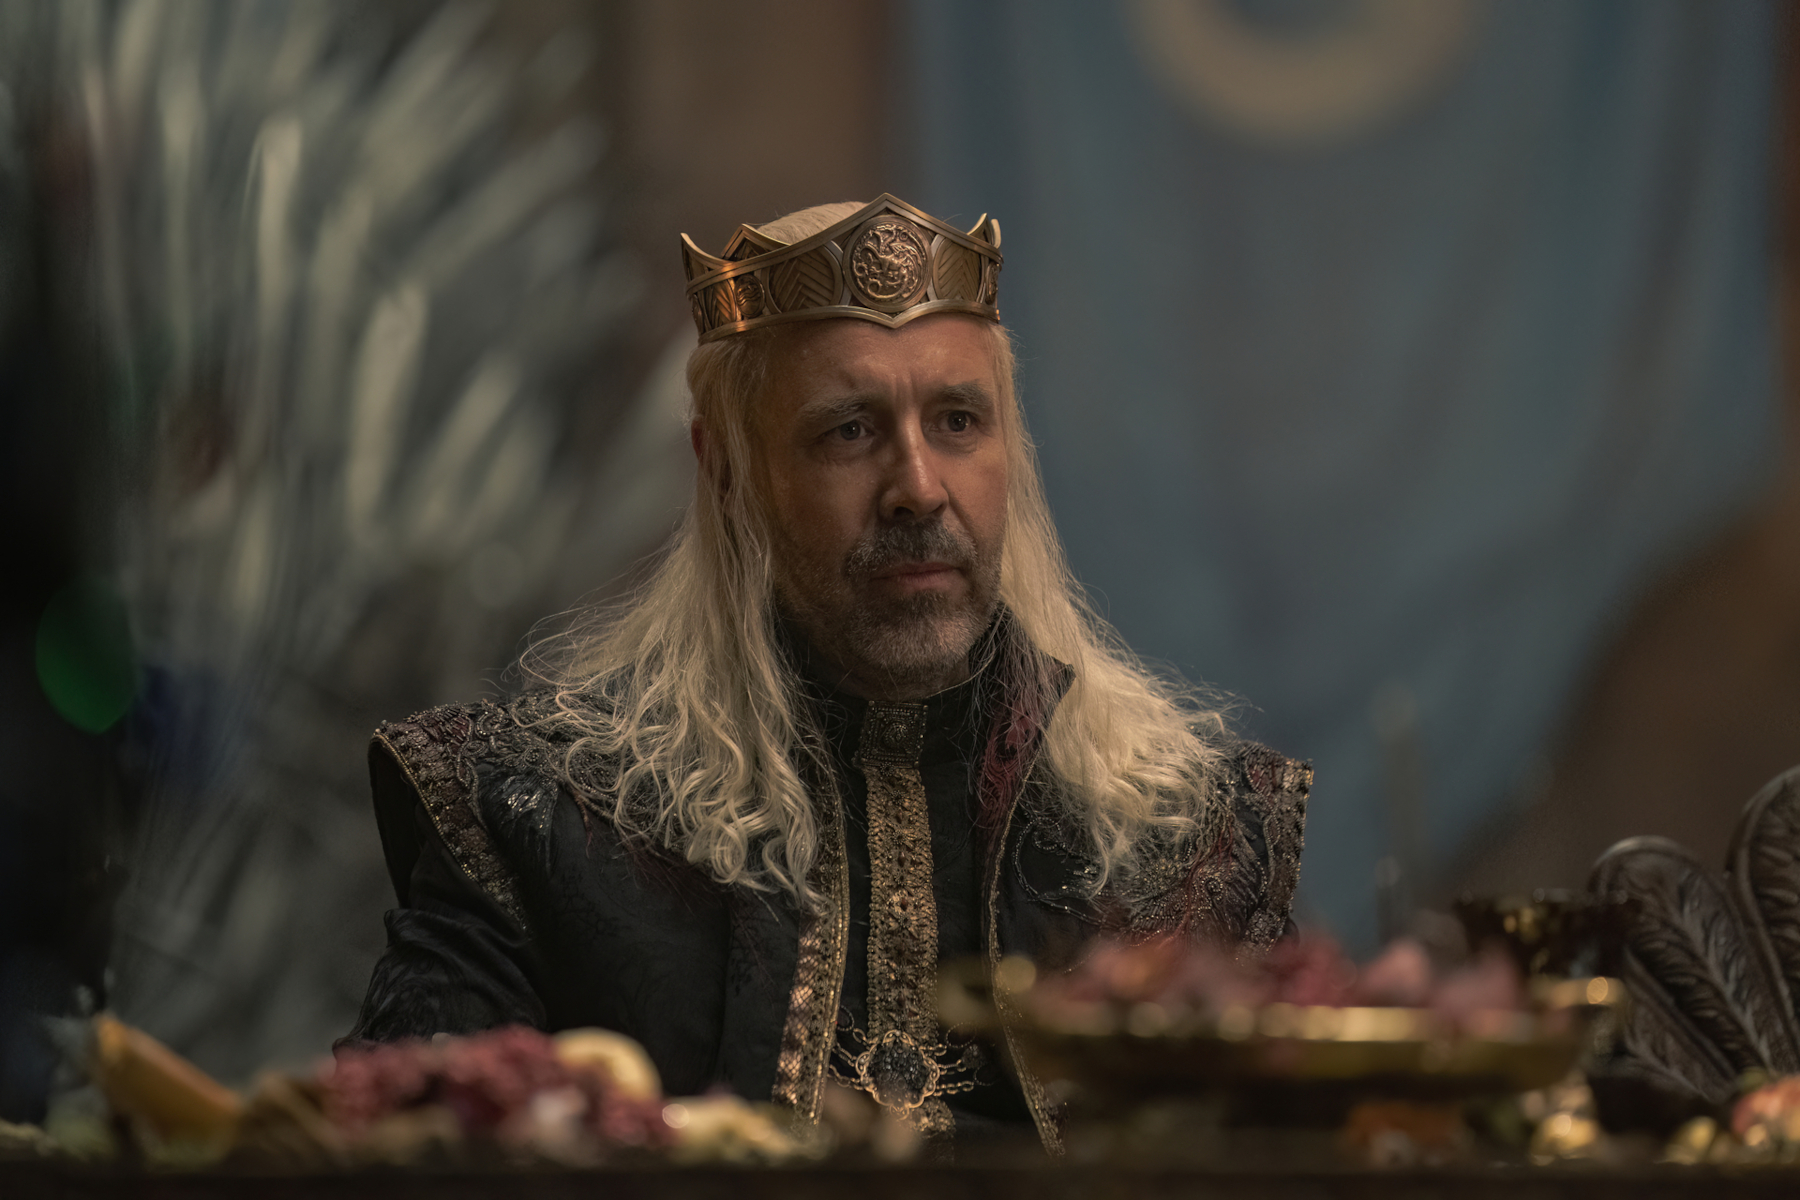 Paddy Considine as King Viserys Targaryen in 'House of the Dragon.' He's sitting at a table, there's food on it, and he's wearing his crown.